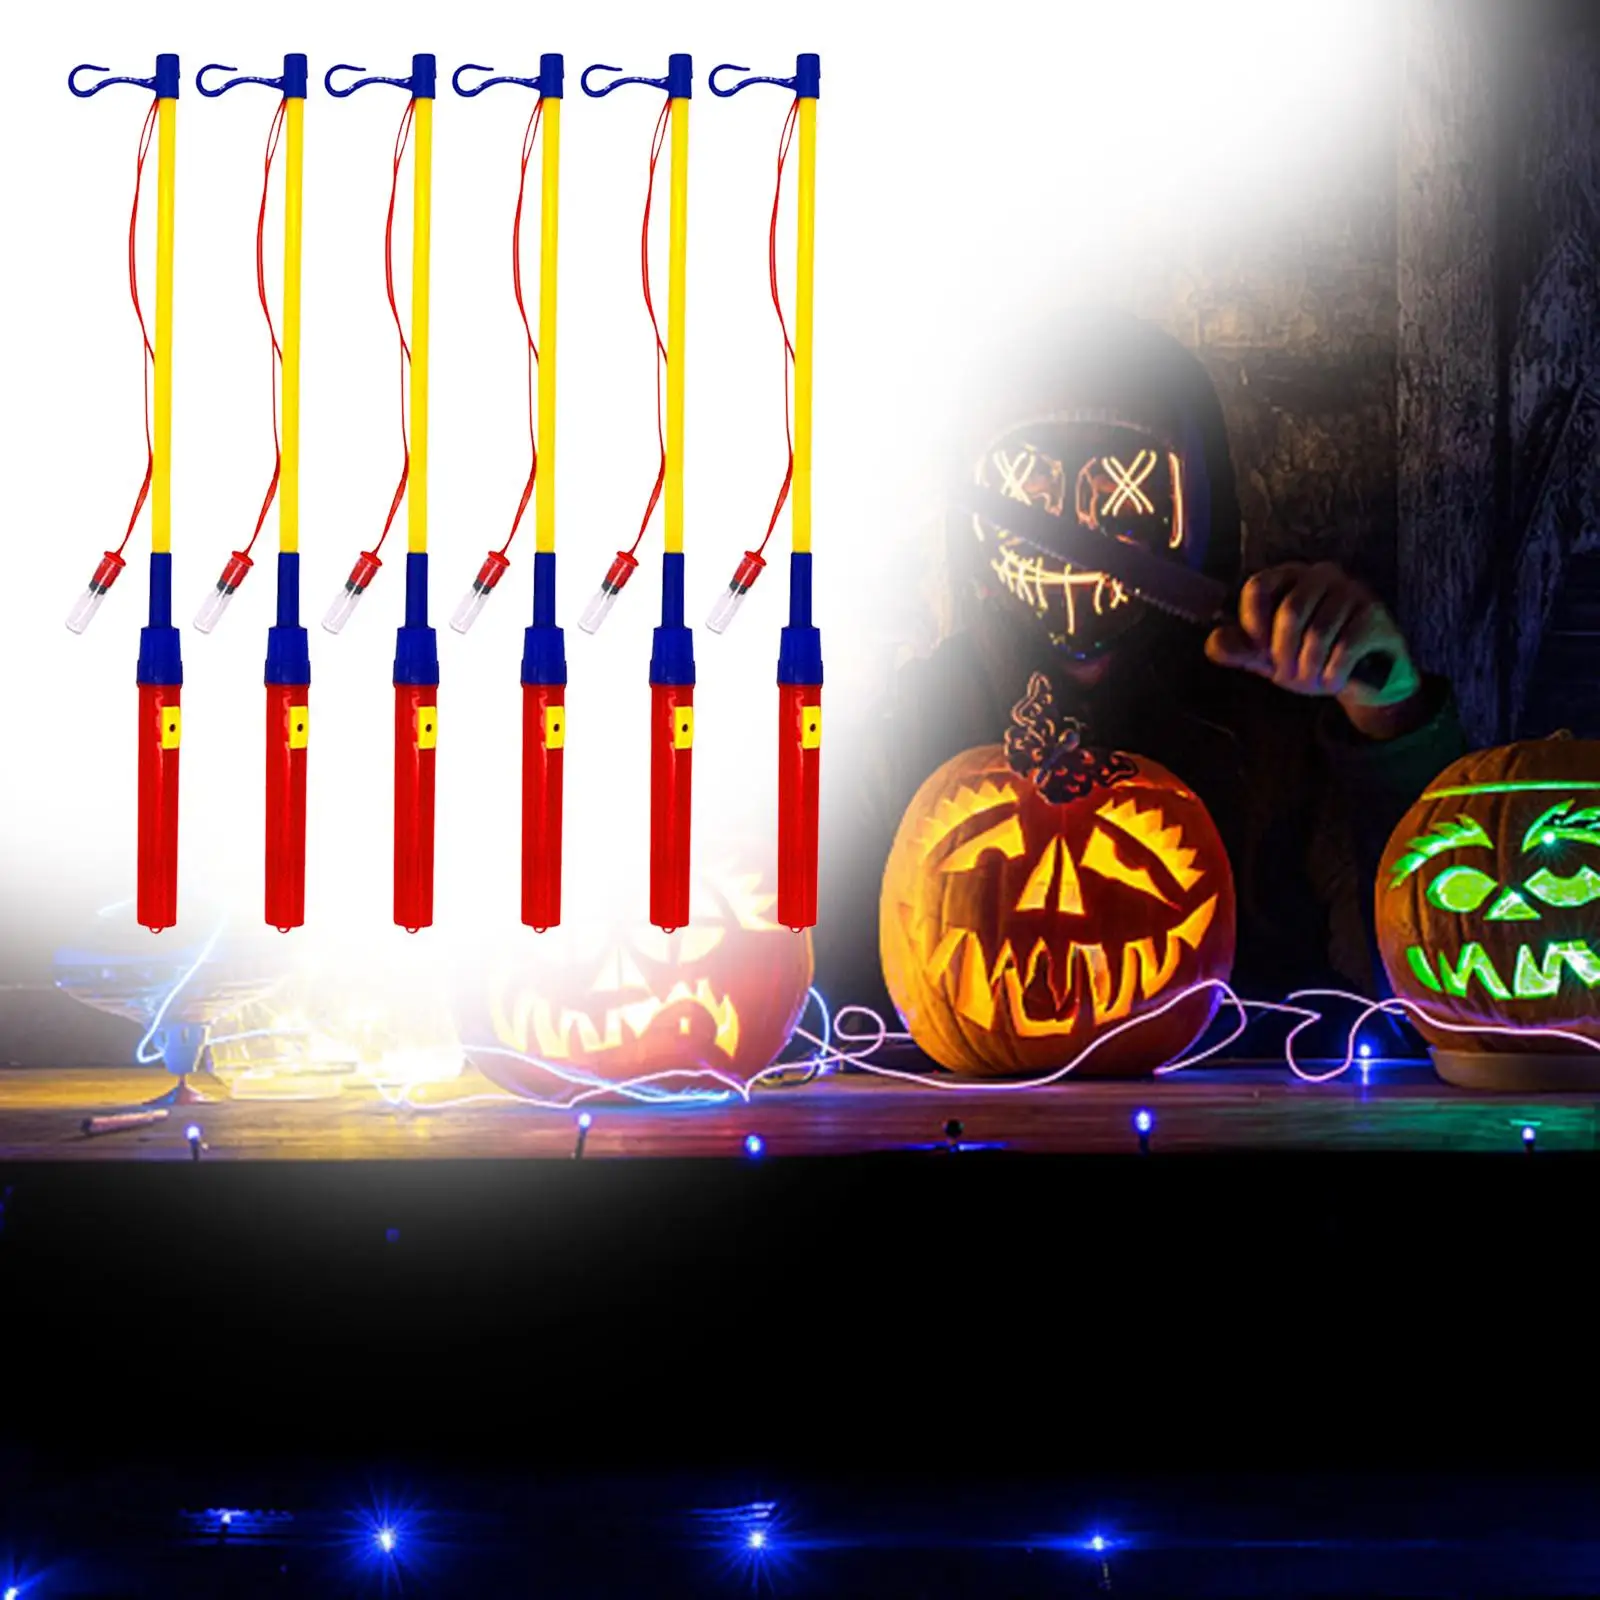 6x Lantern Stick with LED with Hook Pole Holder for Lantern Parades Kindergarten Children`s Party Halloween Costume Party